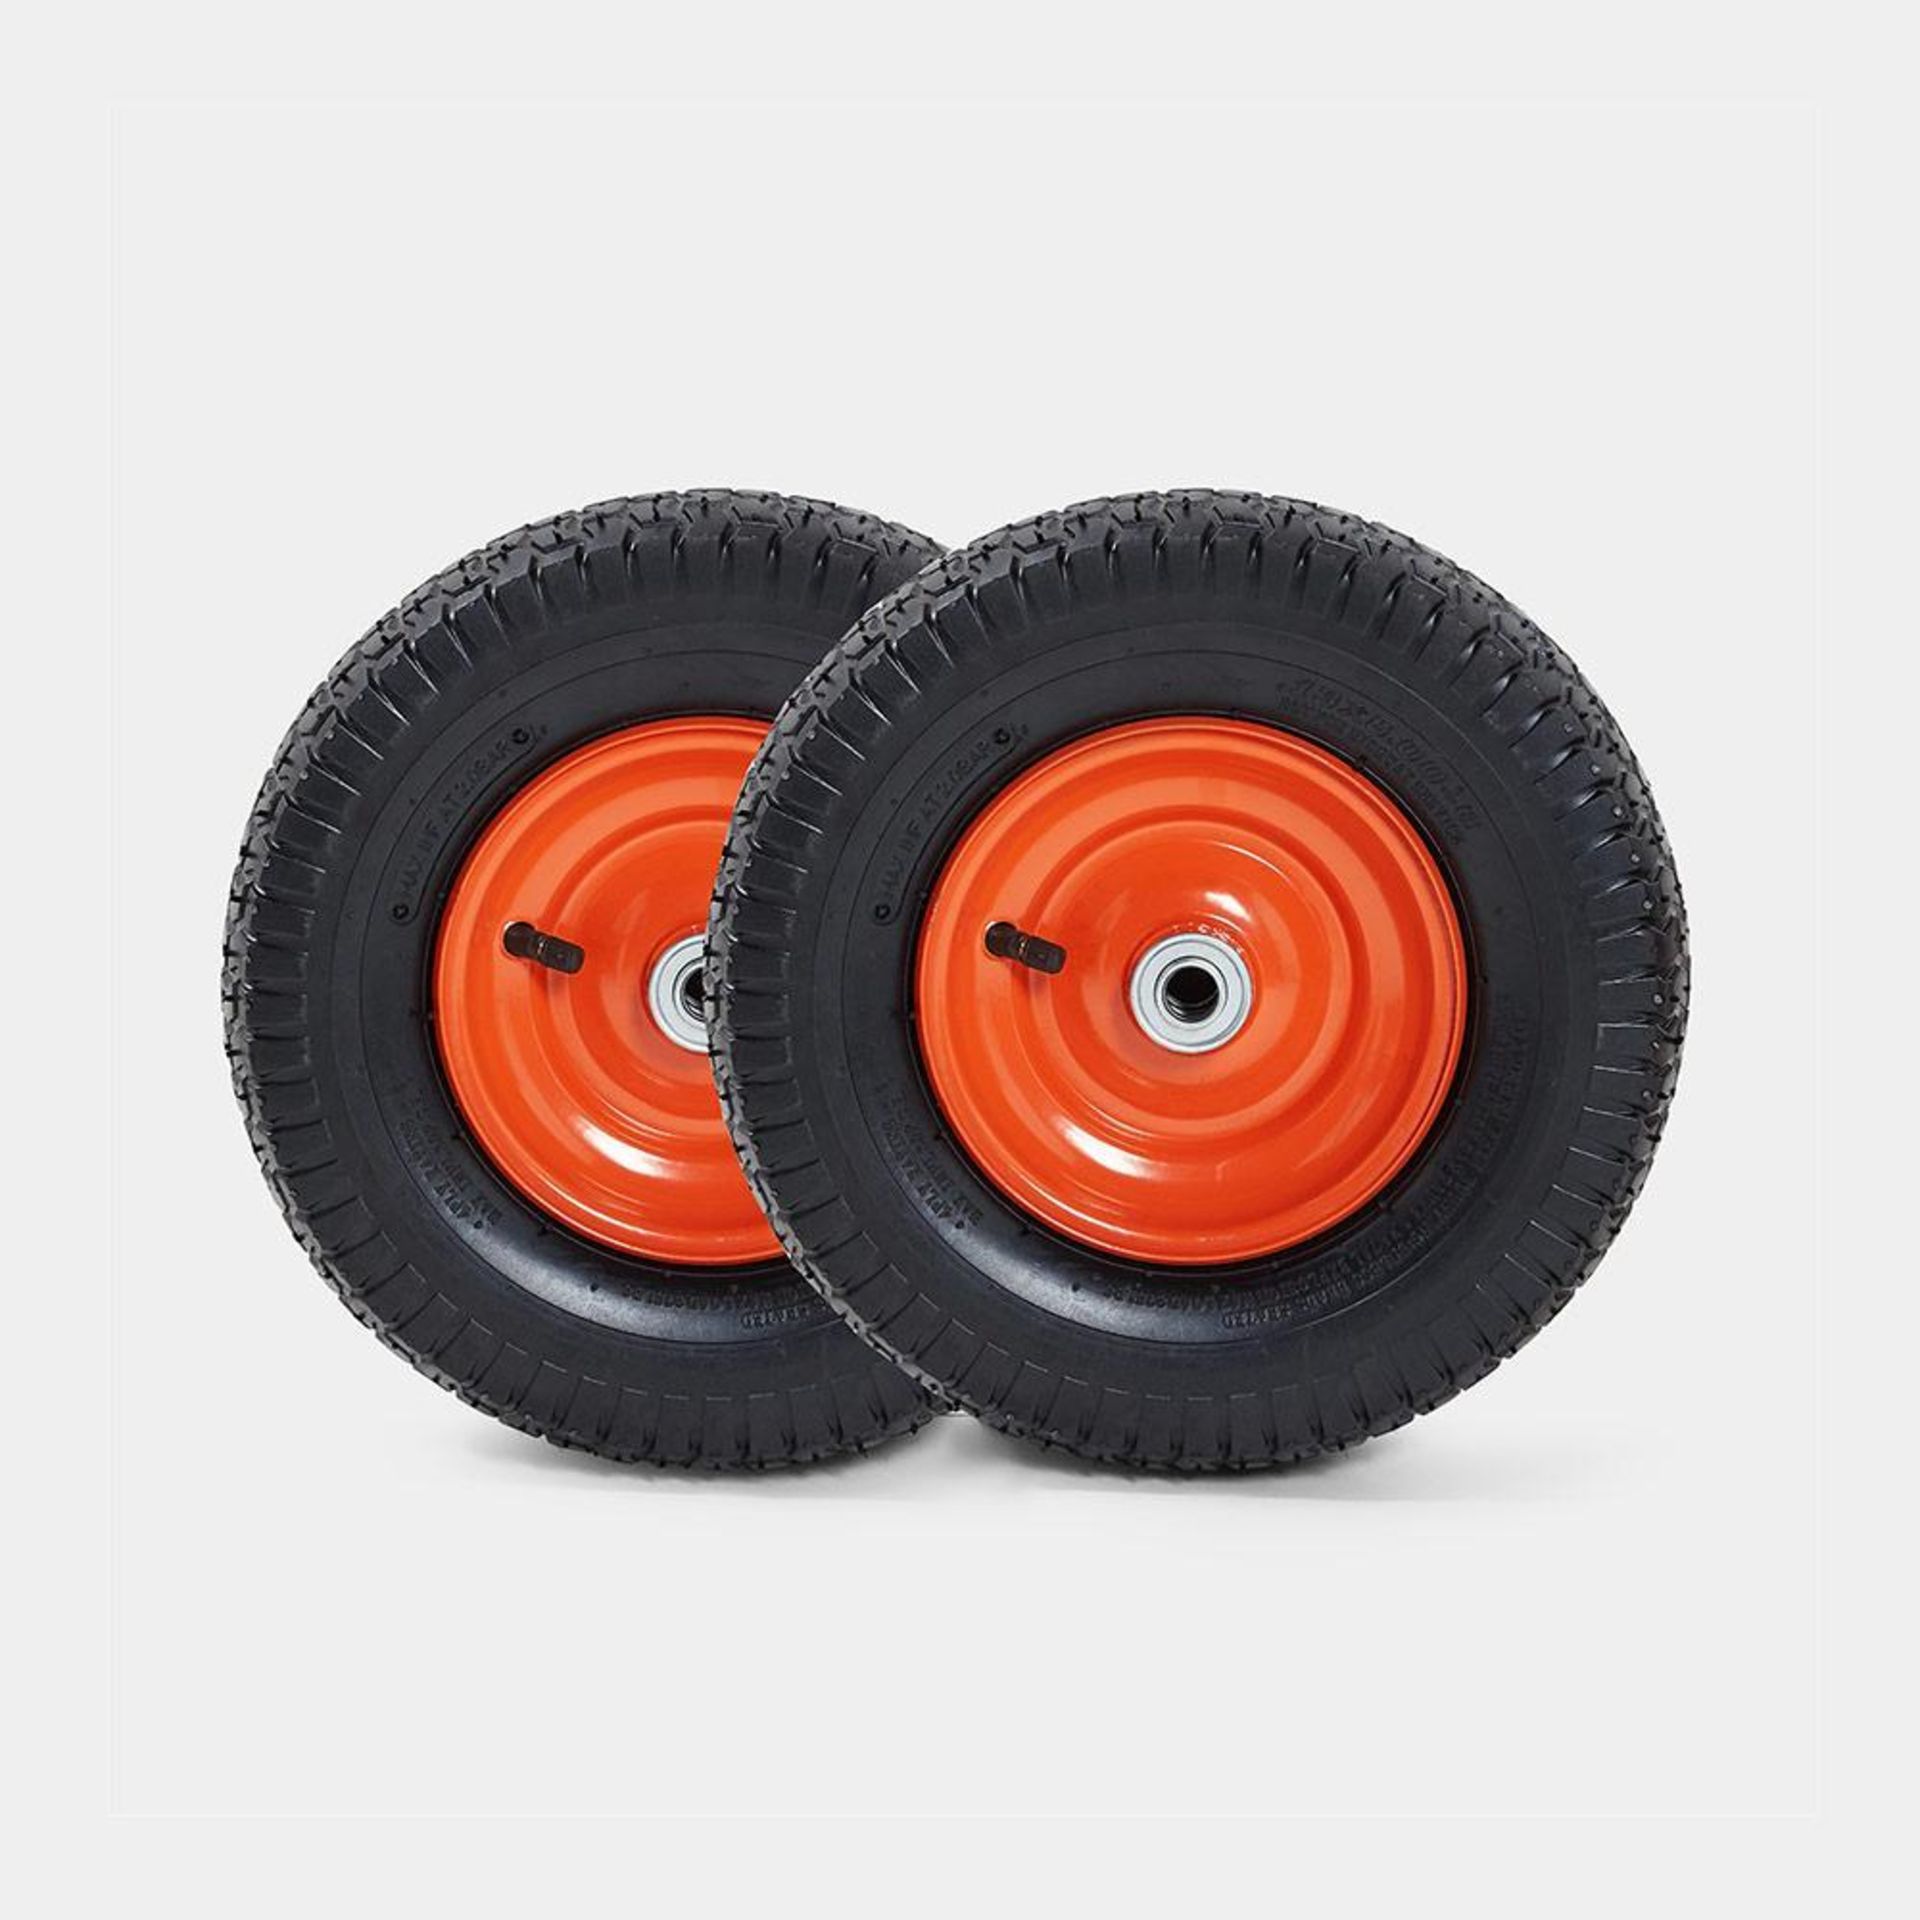 Spare Pneumatic Wheels 2 Pack Replace worn wheels on your Garden Trolley Cart with this 2 pack (4